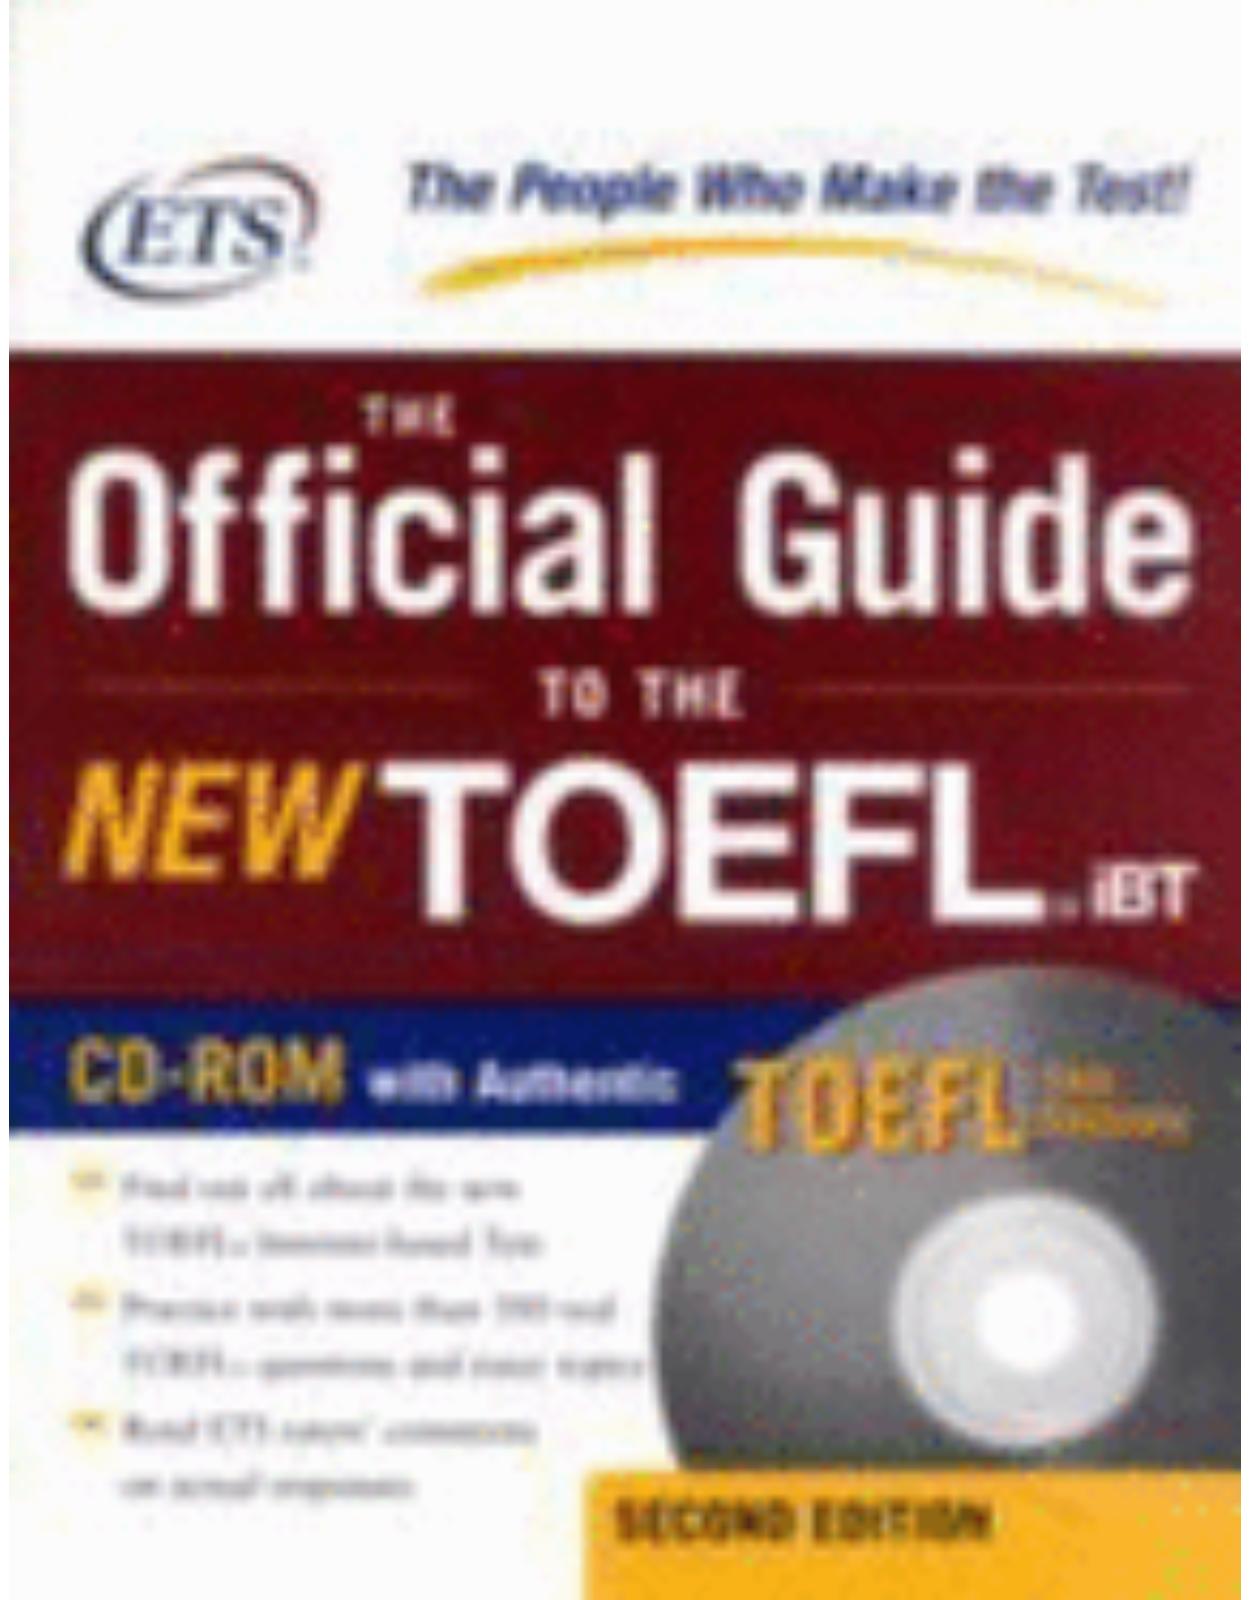 Official Guide to the New Toefl (Paperback)